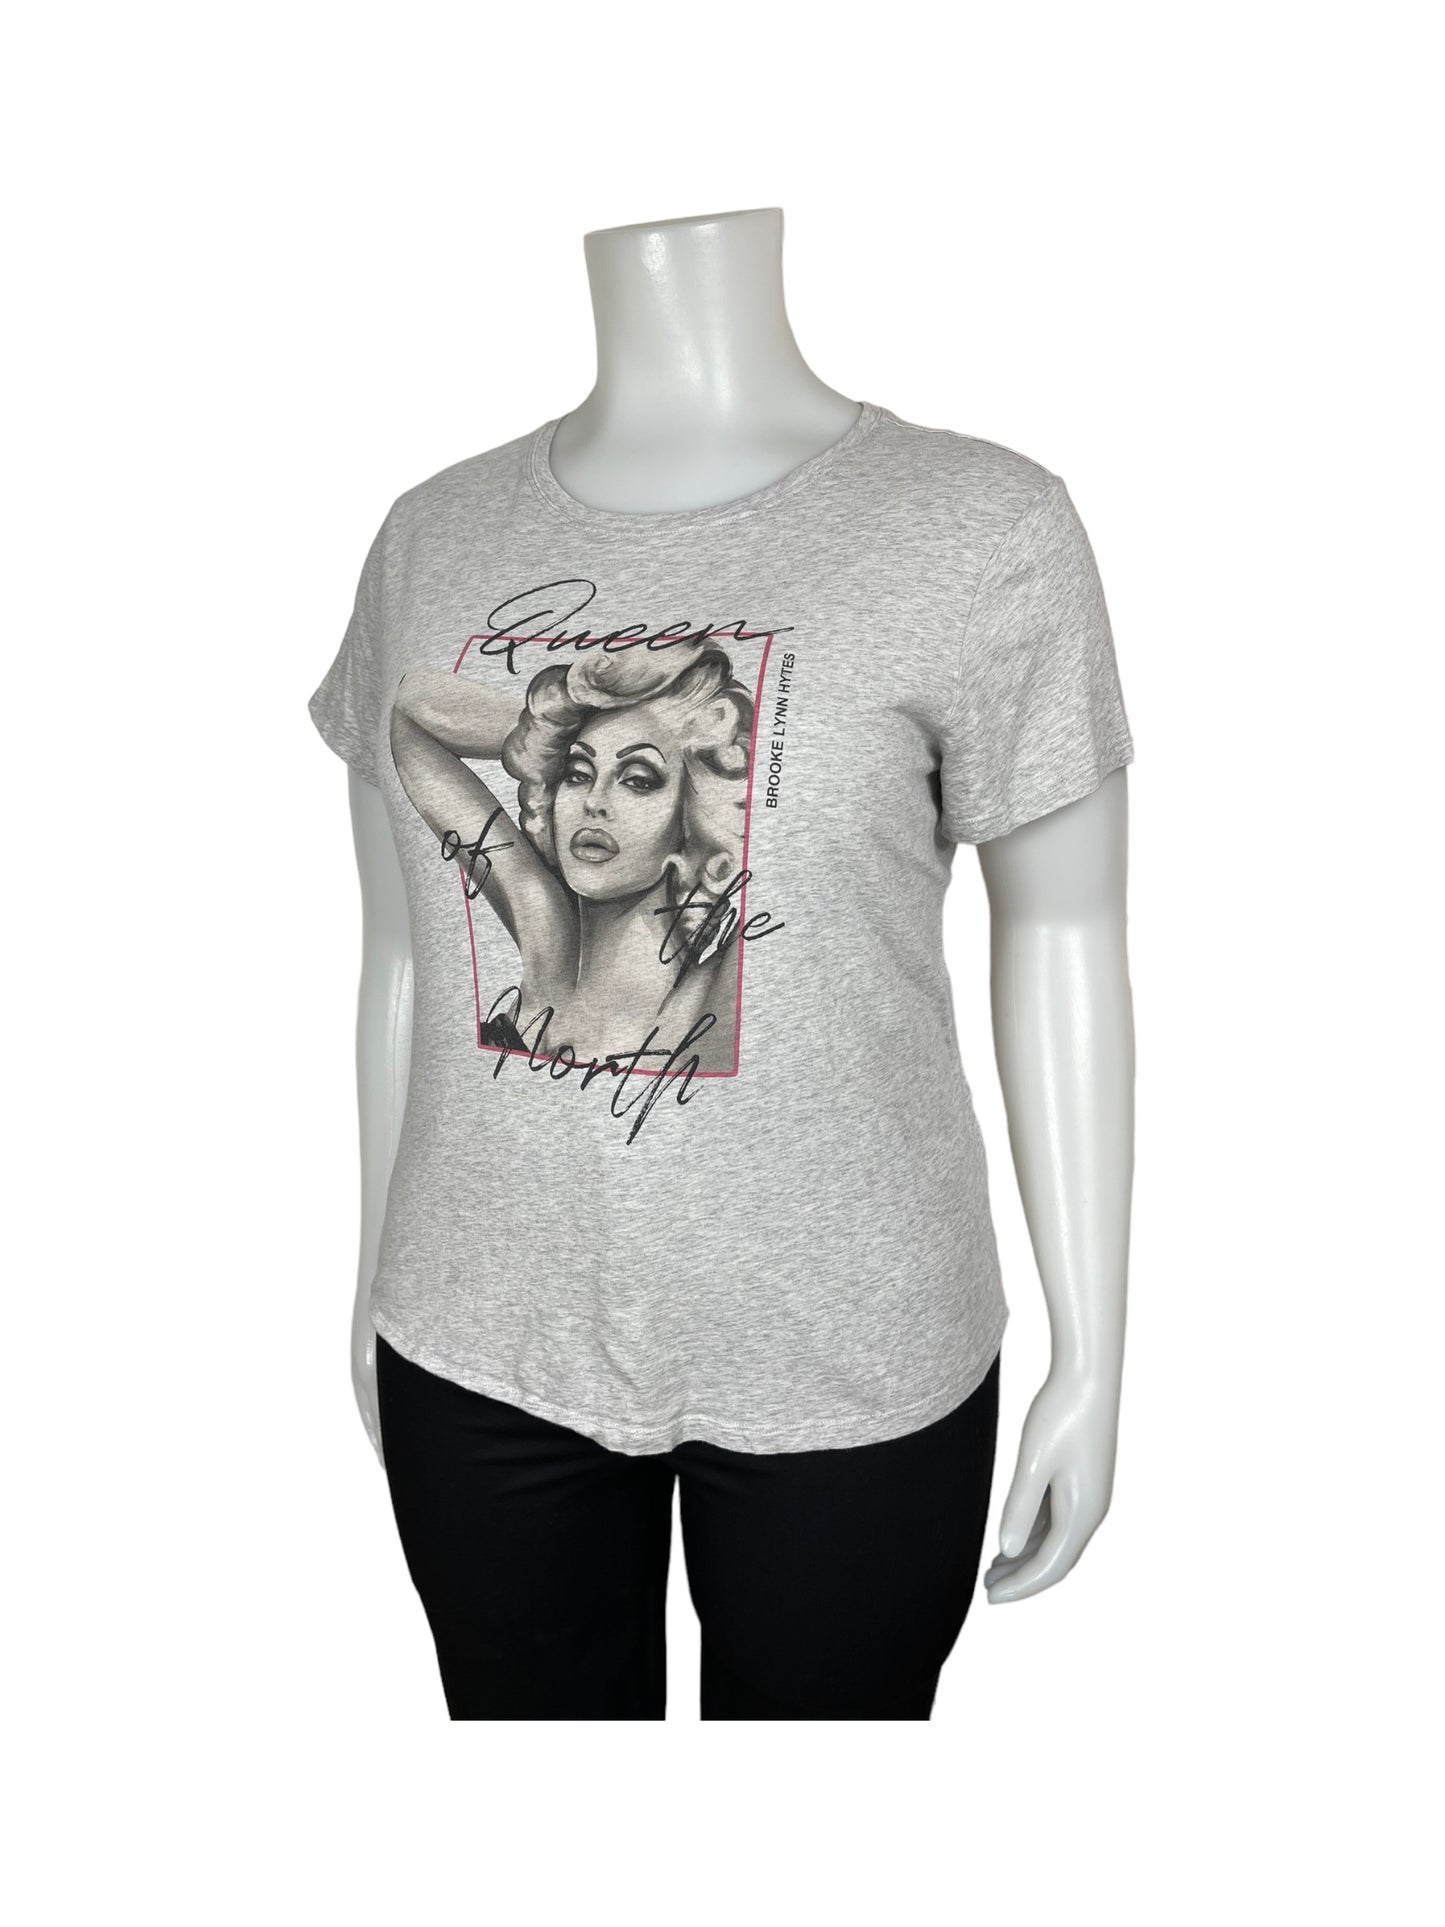 “Reitmans” Grey Graphic T-Shirt w/ ‘Queen of the North’